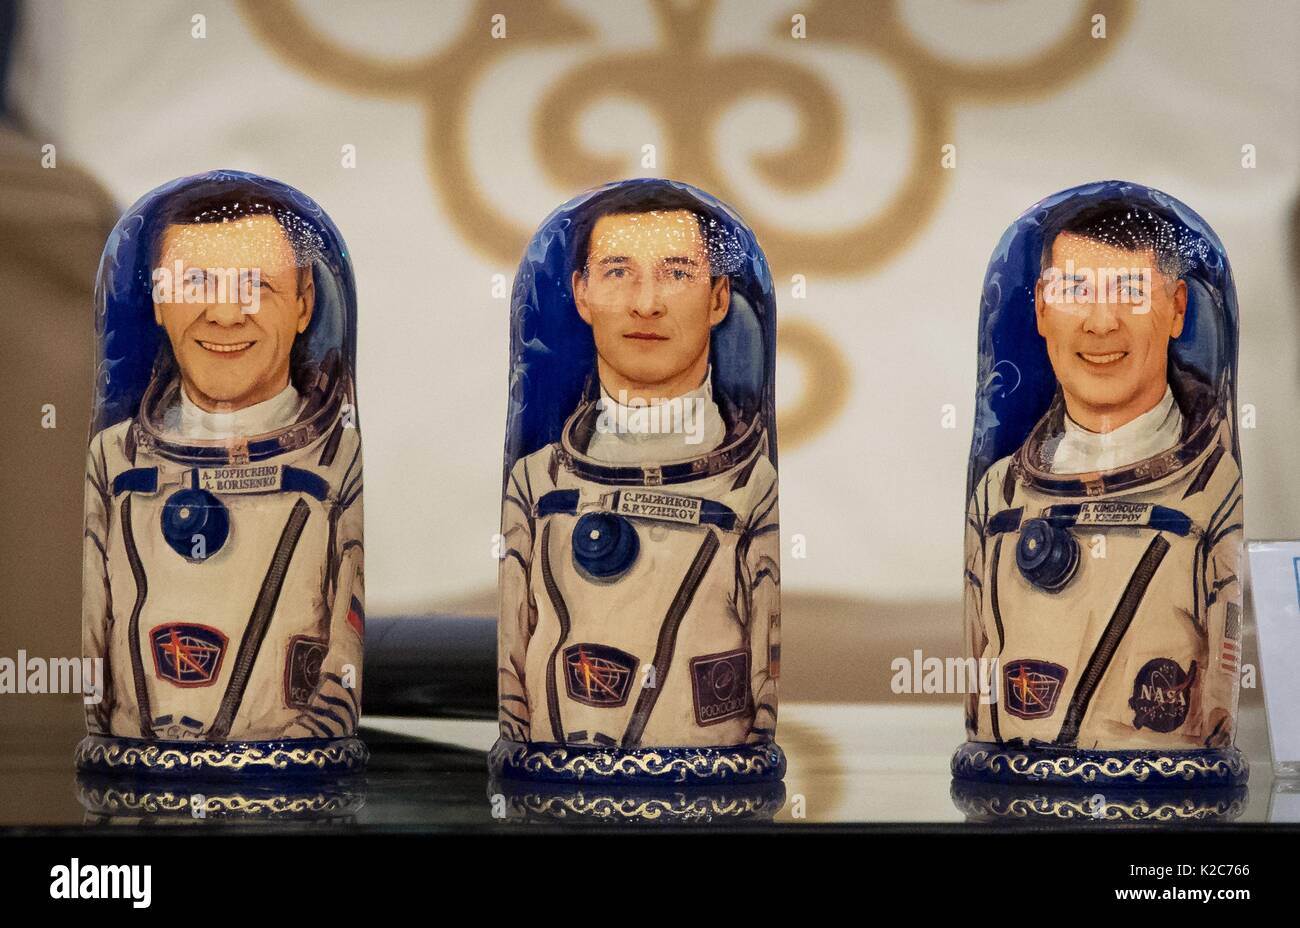 Hand-painted Russian matryoshka nesting dolls depicting NASA International Space Station Expedition 50 Soyuz MS-02 prime crew members (L-R) Russian cosmonauts Andrey Borisenko and Sergey Ryzhikov of Roscosmos, and American astronaut Shane Kimbrough are on display during a welcome ceremony at the Karaganda Airport April 10, 2017 in Karagandy, Kazakhstan. Stock Photo